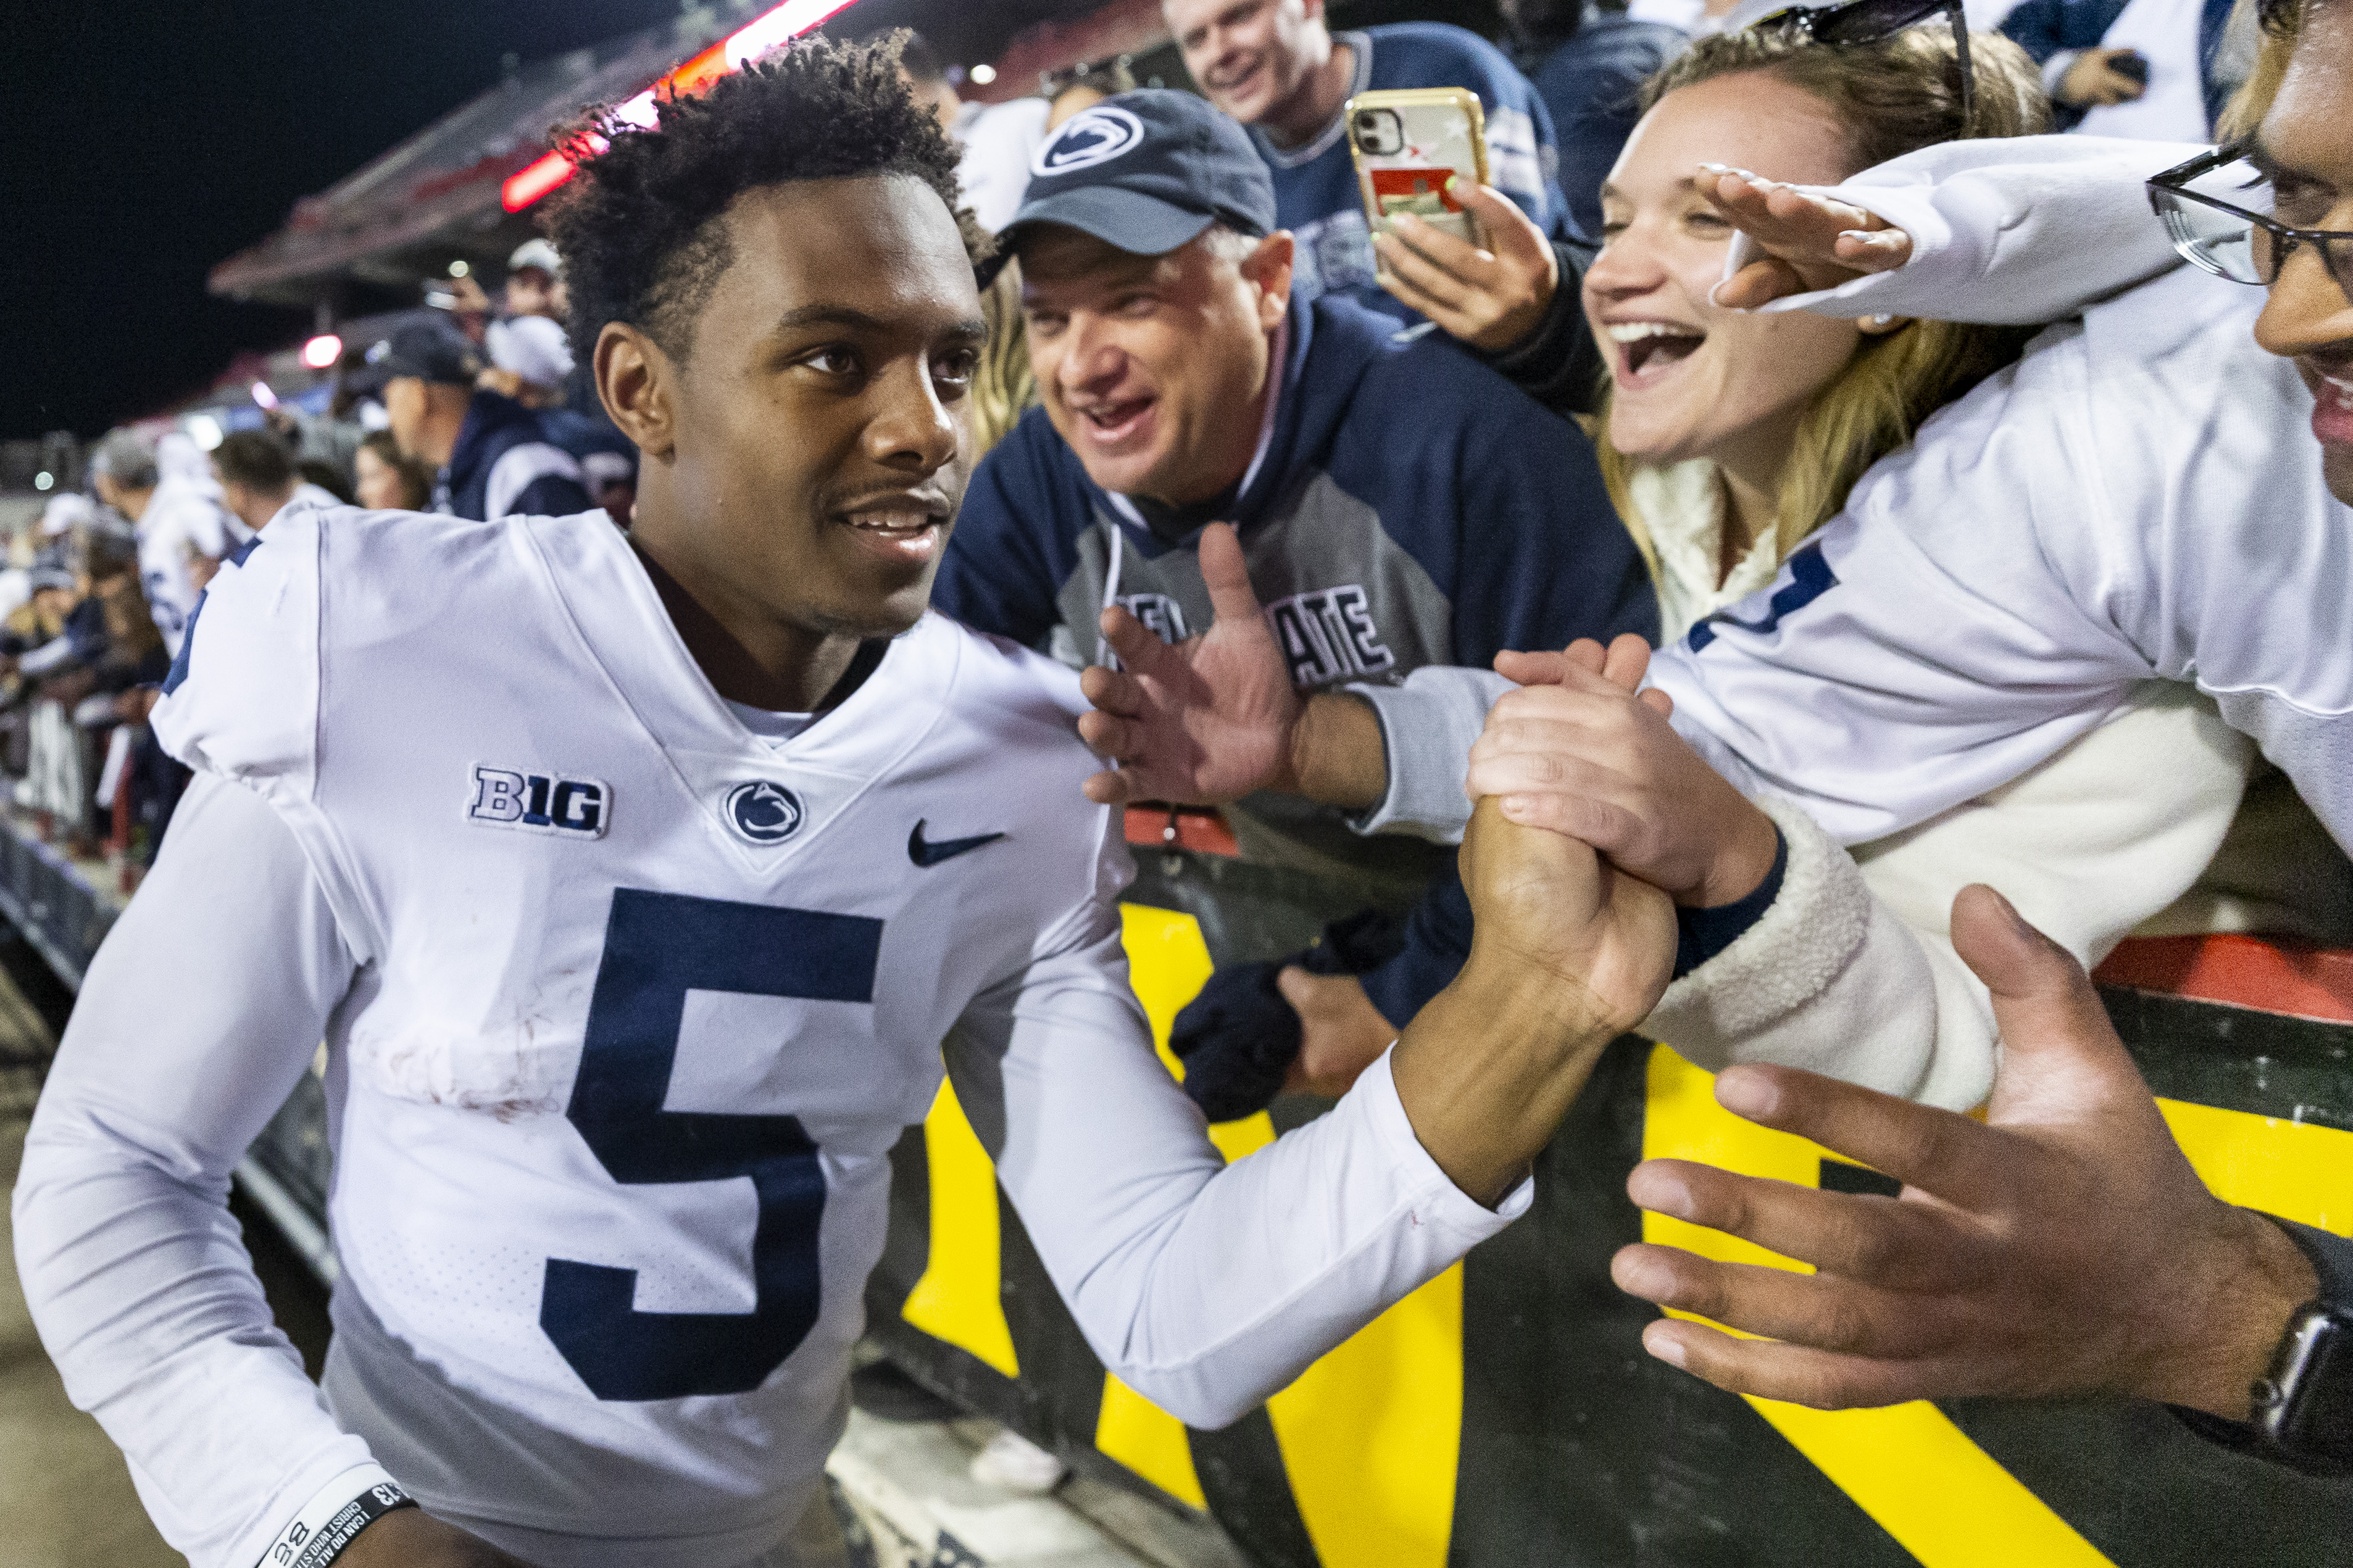 Penn State wide receiver Jahan Dotson celebrates with fans after the 31-14 win over Maryland on Nov. 6, 2021. Joe Hermitt | jhermitt@pennlive.com